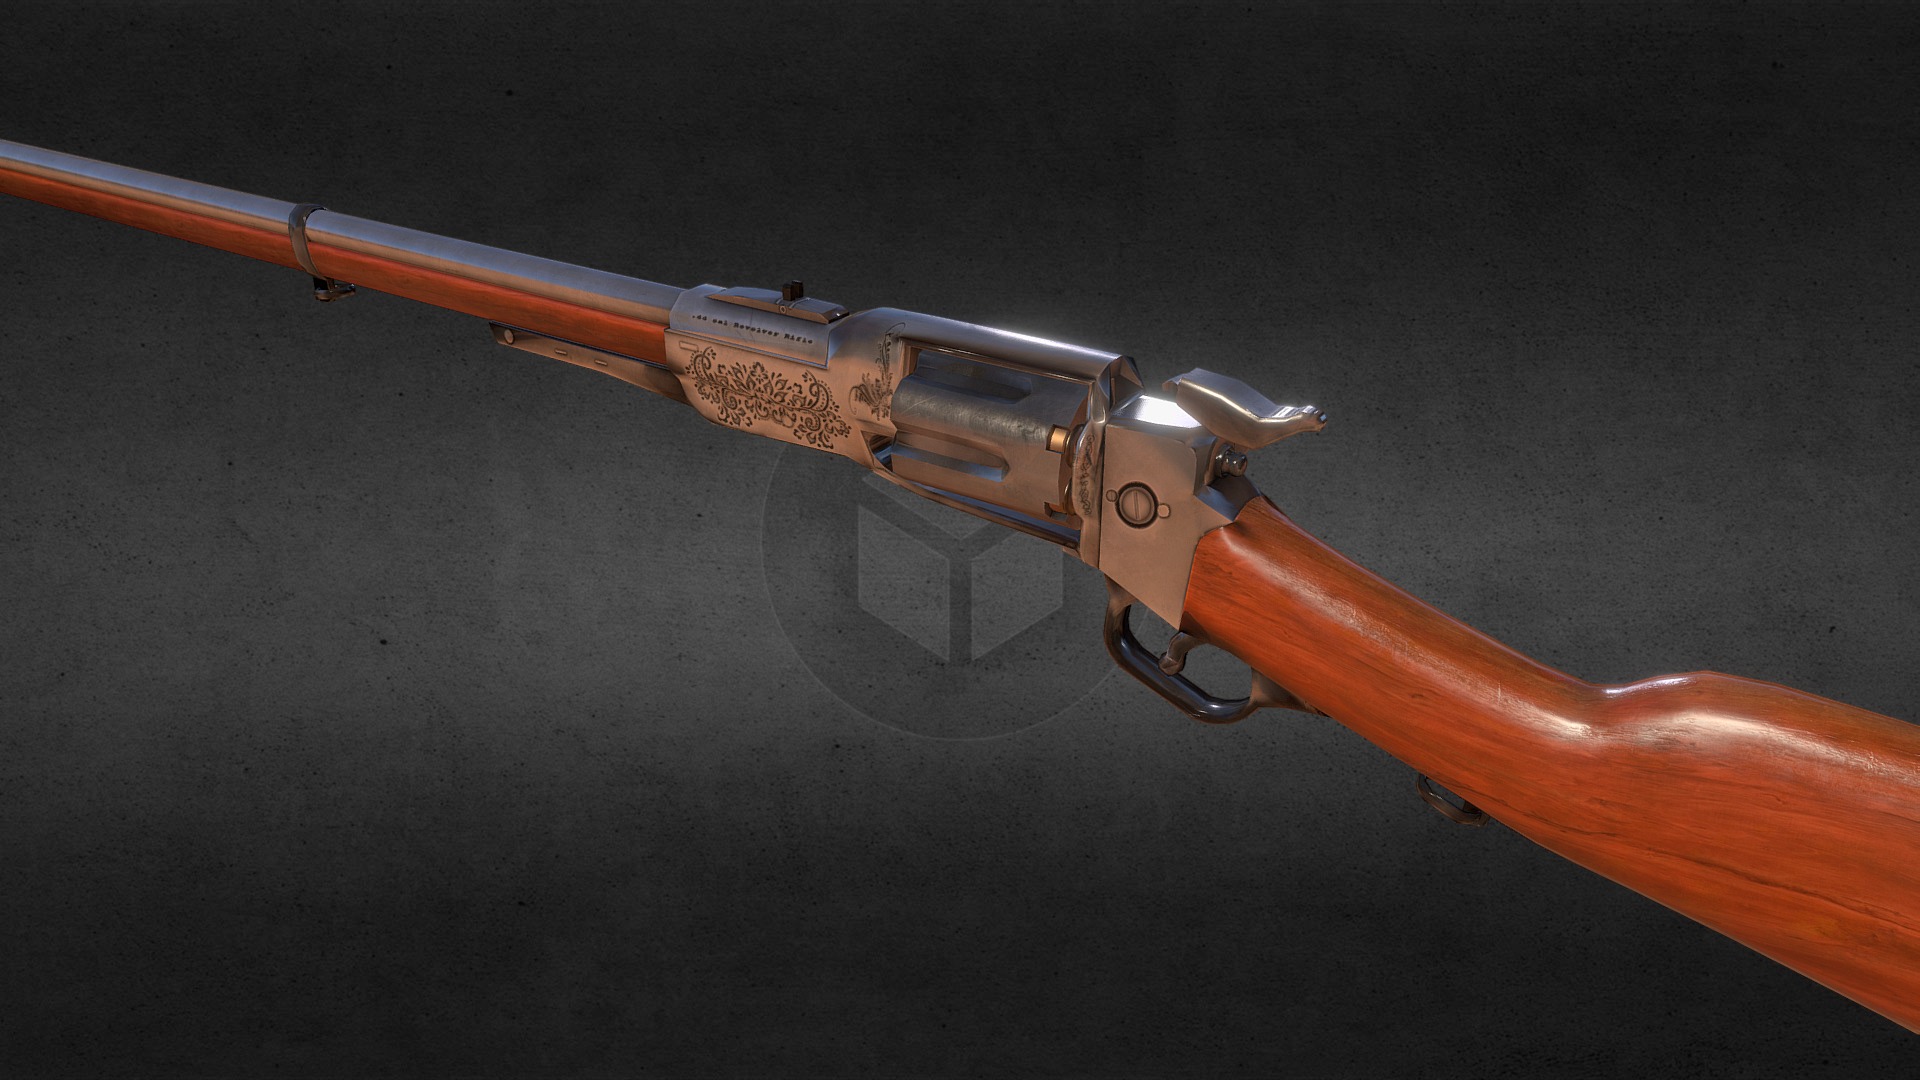 3D model Revolver Rifle - This is a 3D model of the Revolver Rifle. The 3D model is about a rifle on a black surface.